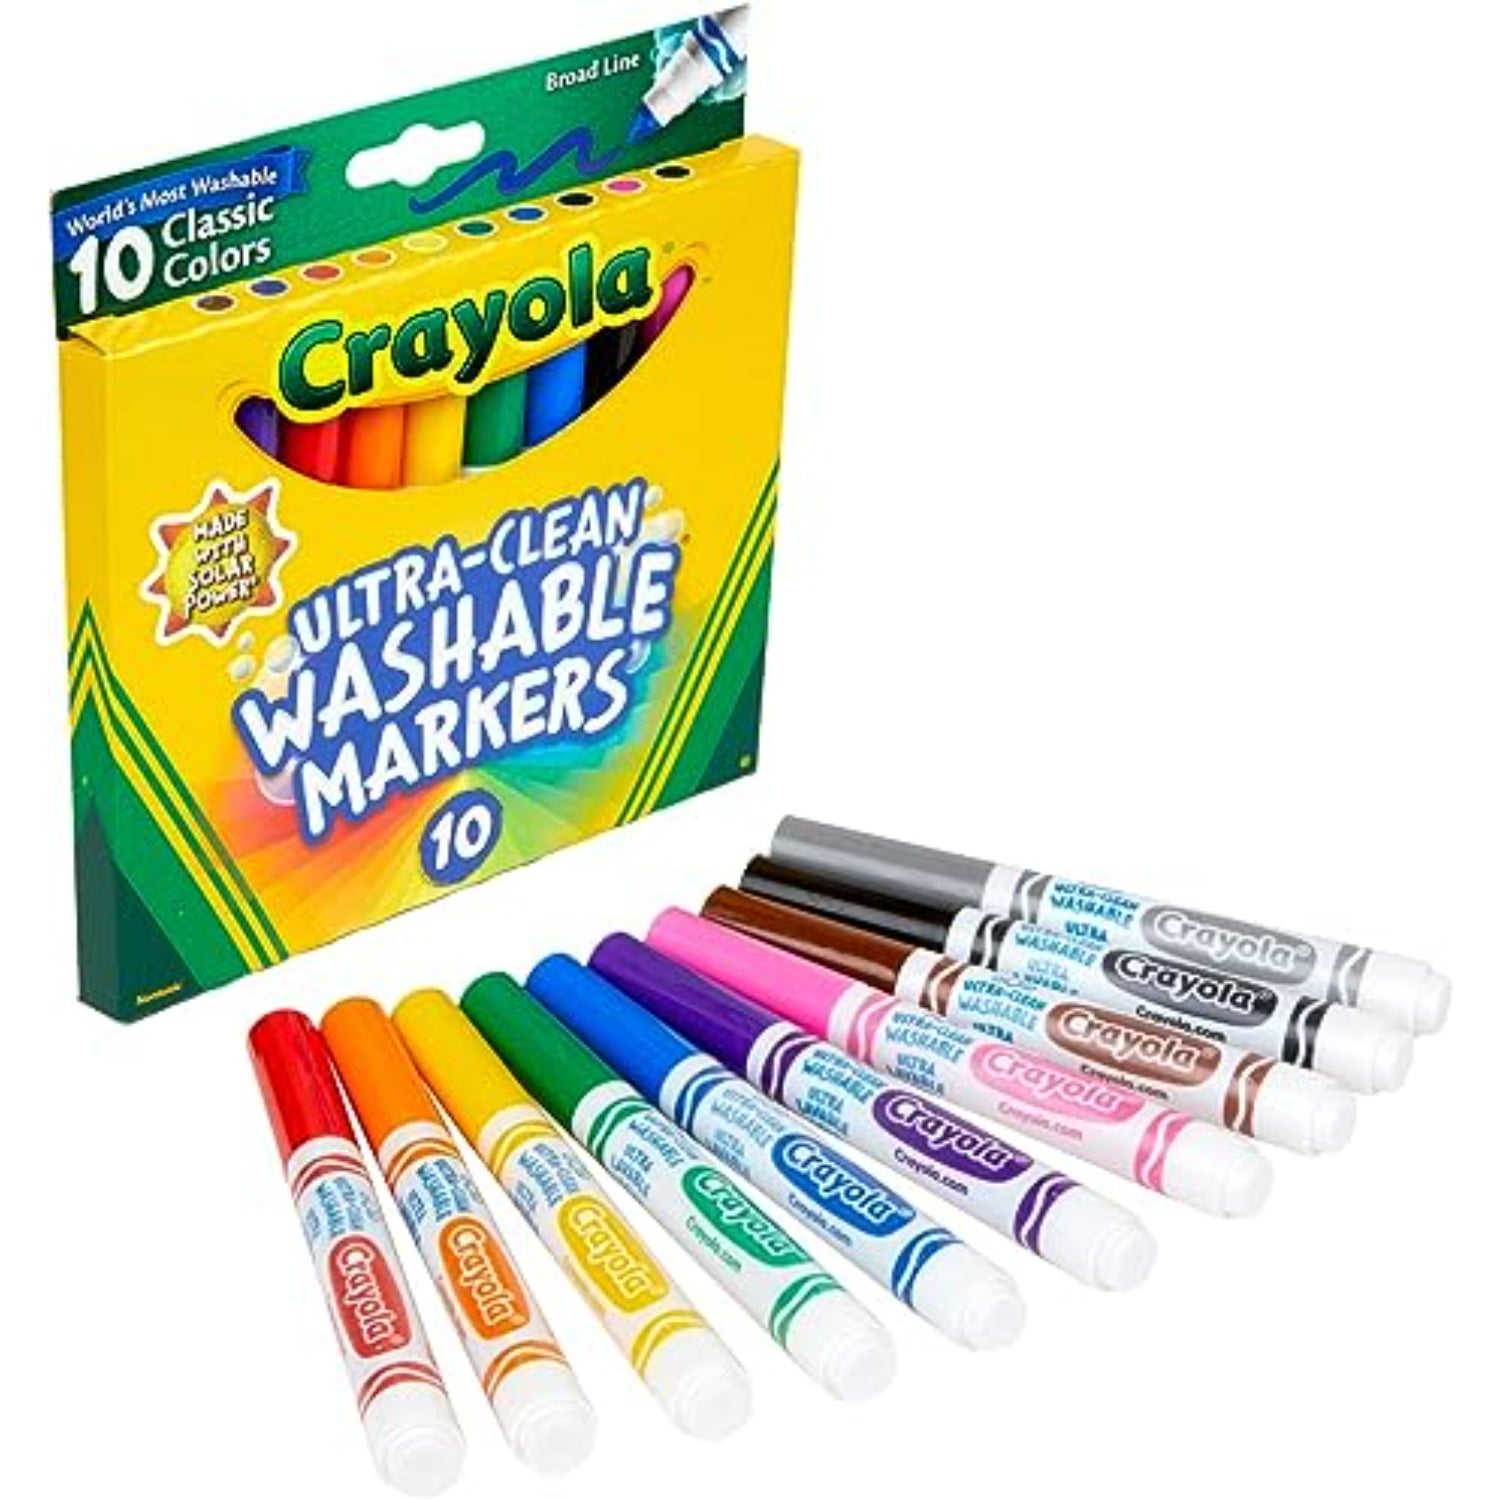 Crayola 10ct Ultra-clean Washable Markers Fine Line Classic Colors